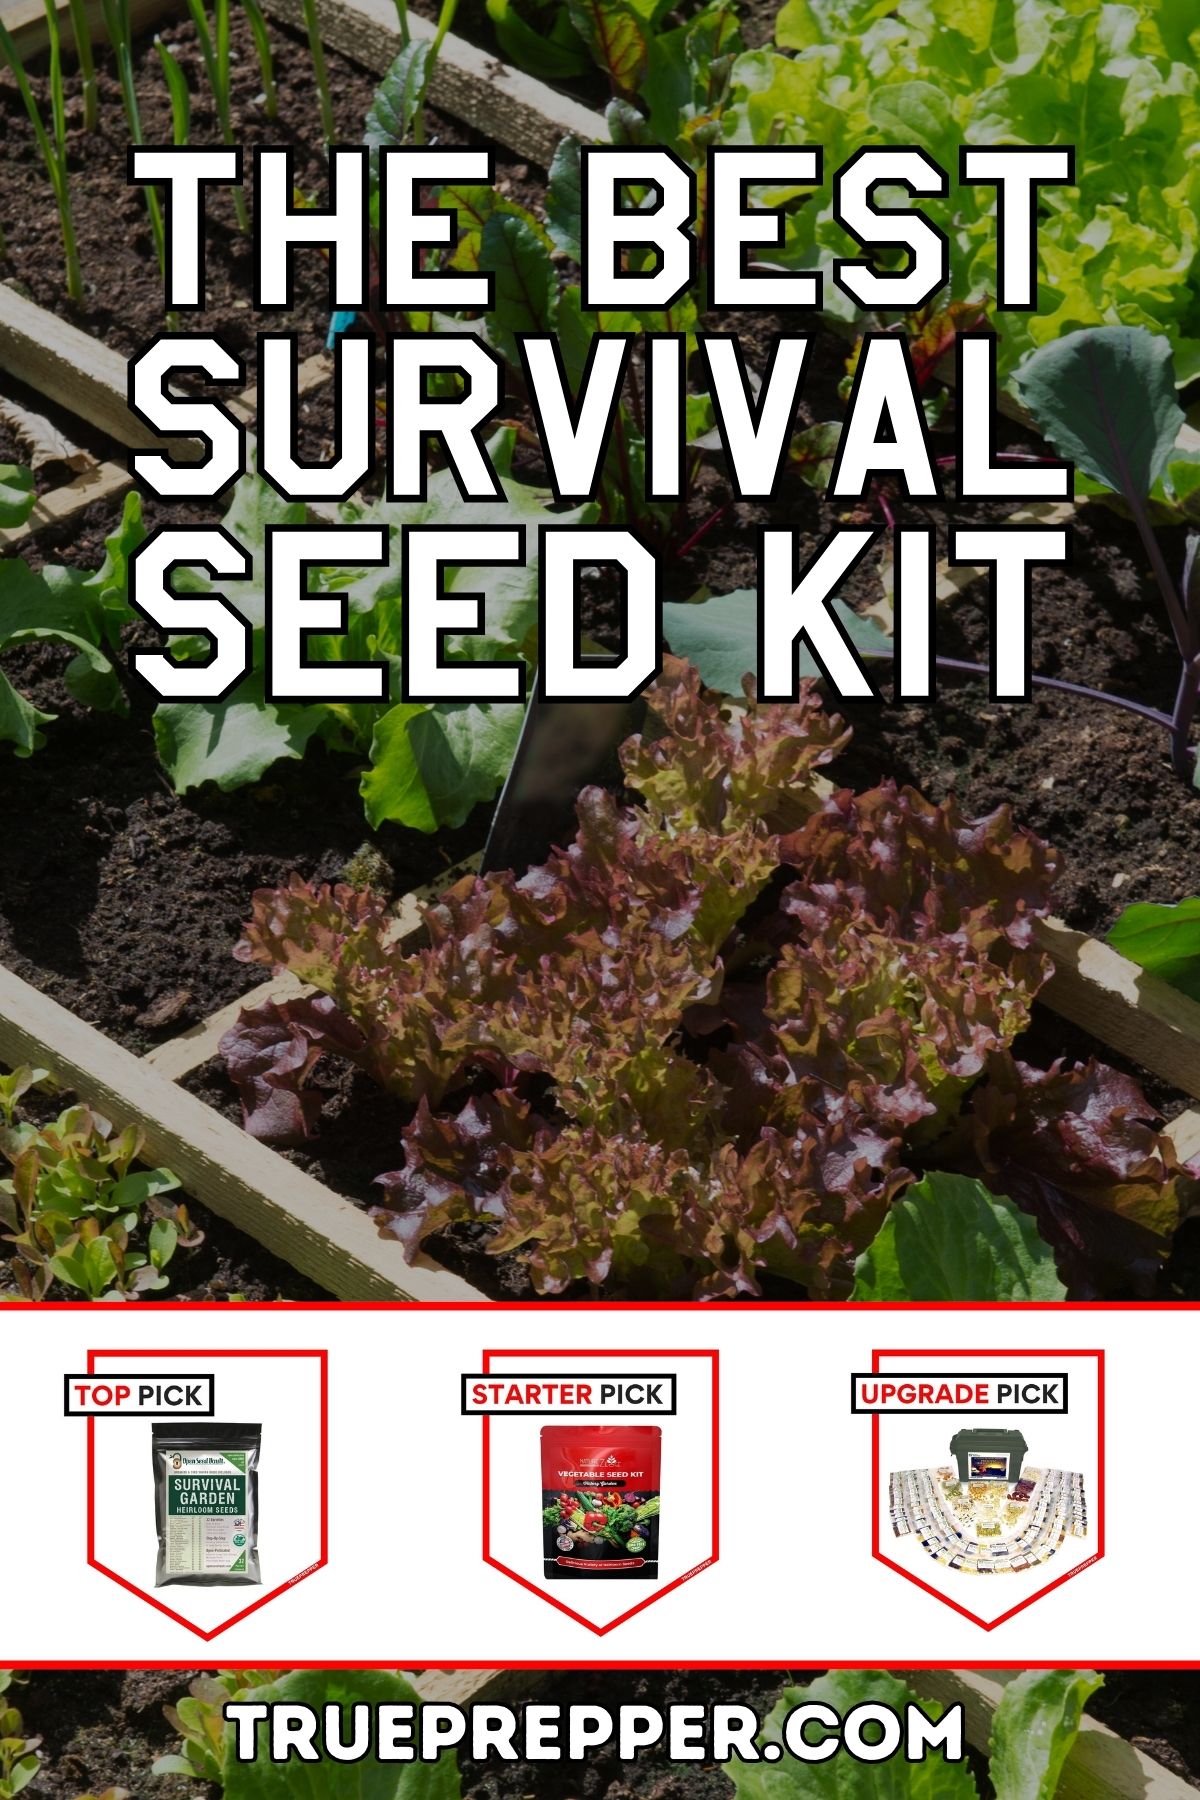 The Best Survival Seed Kit